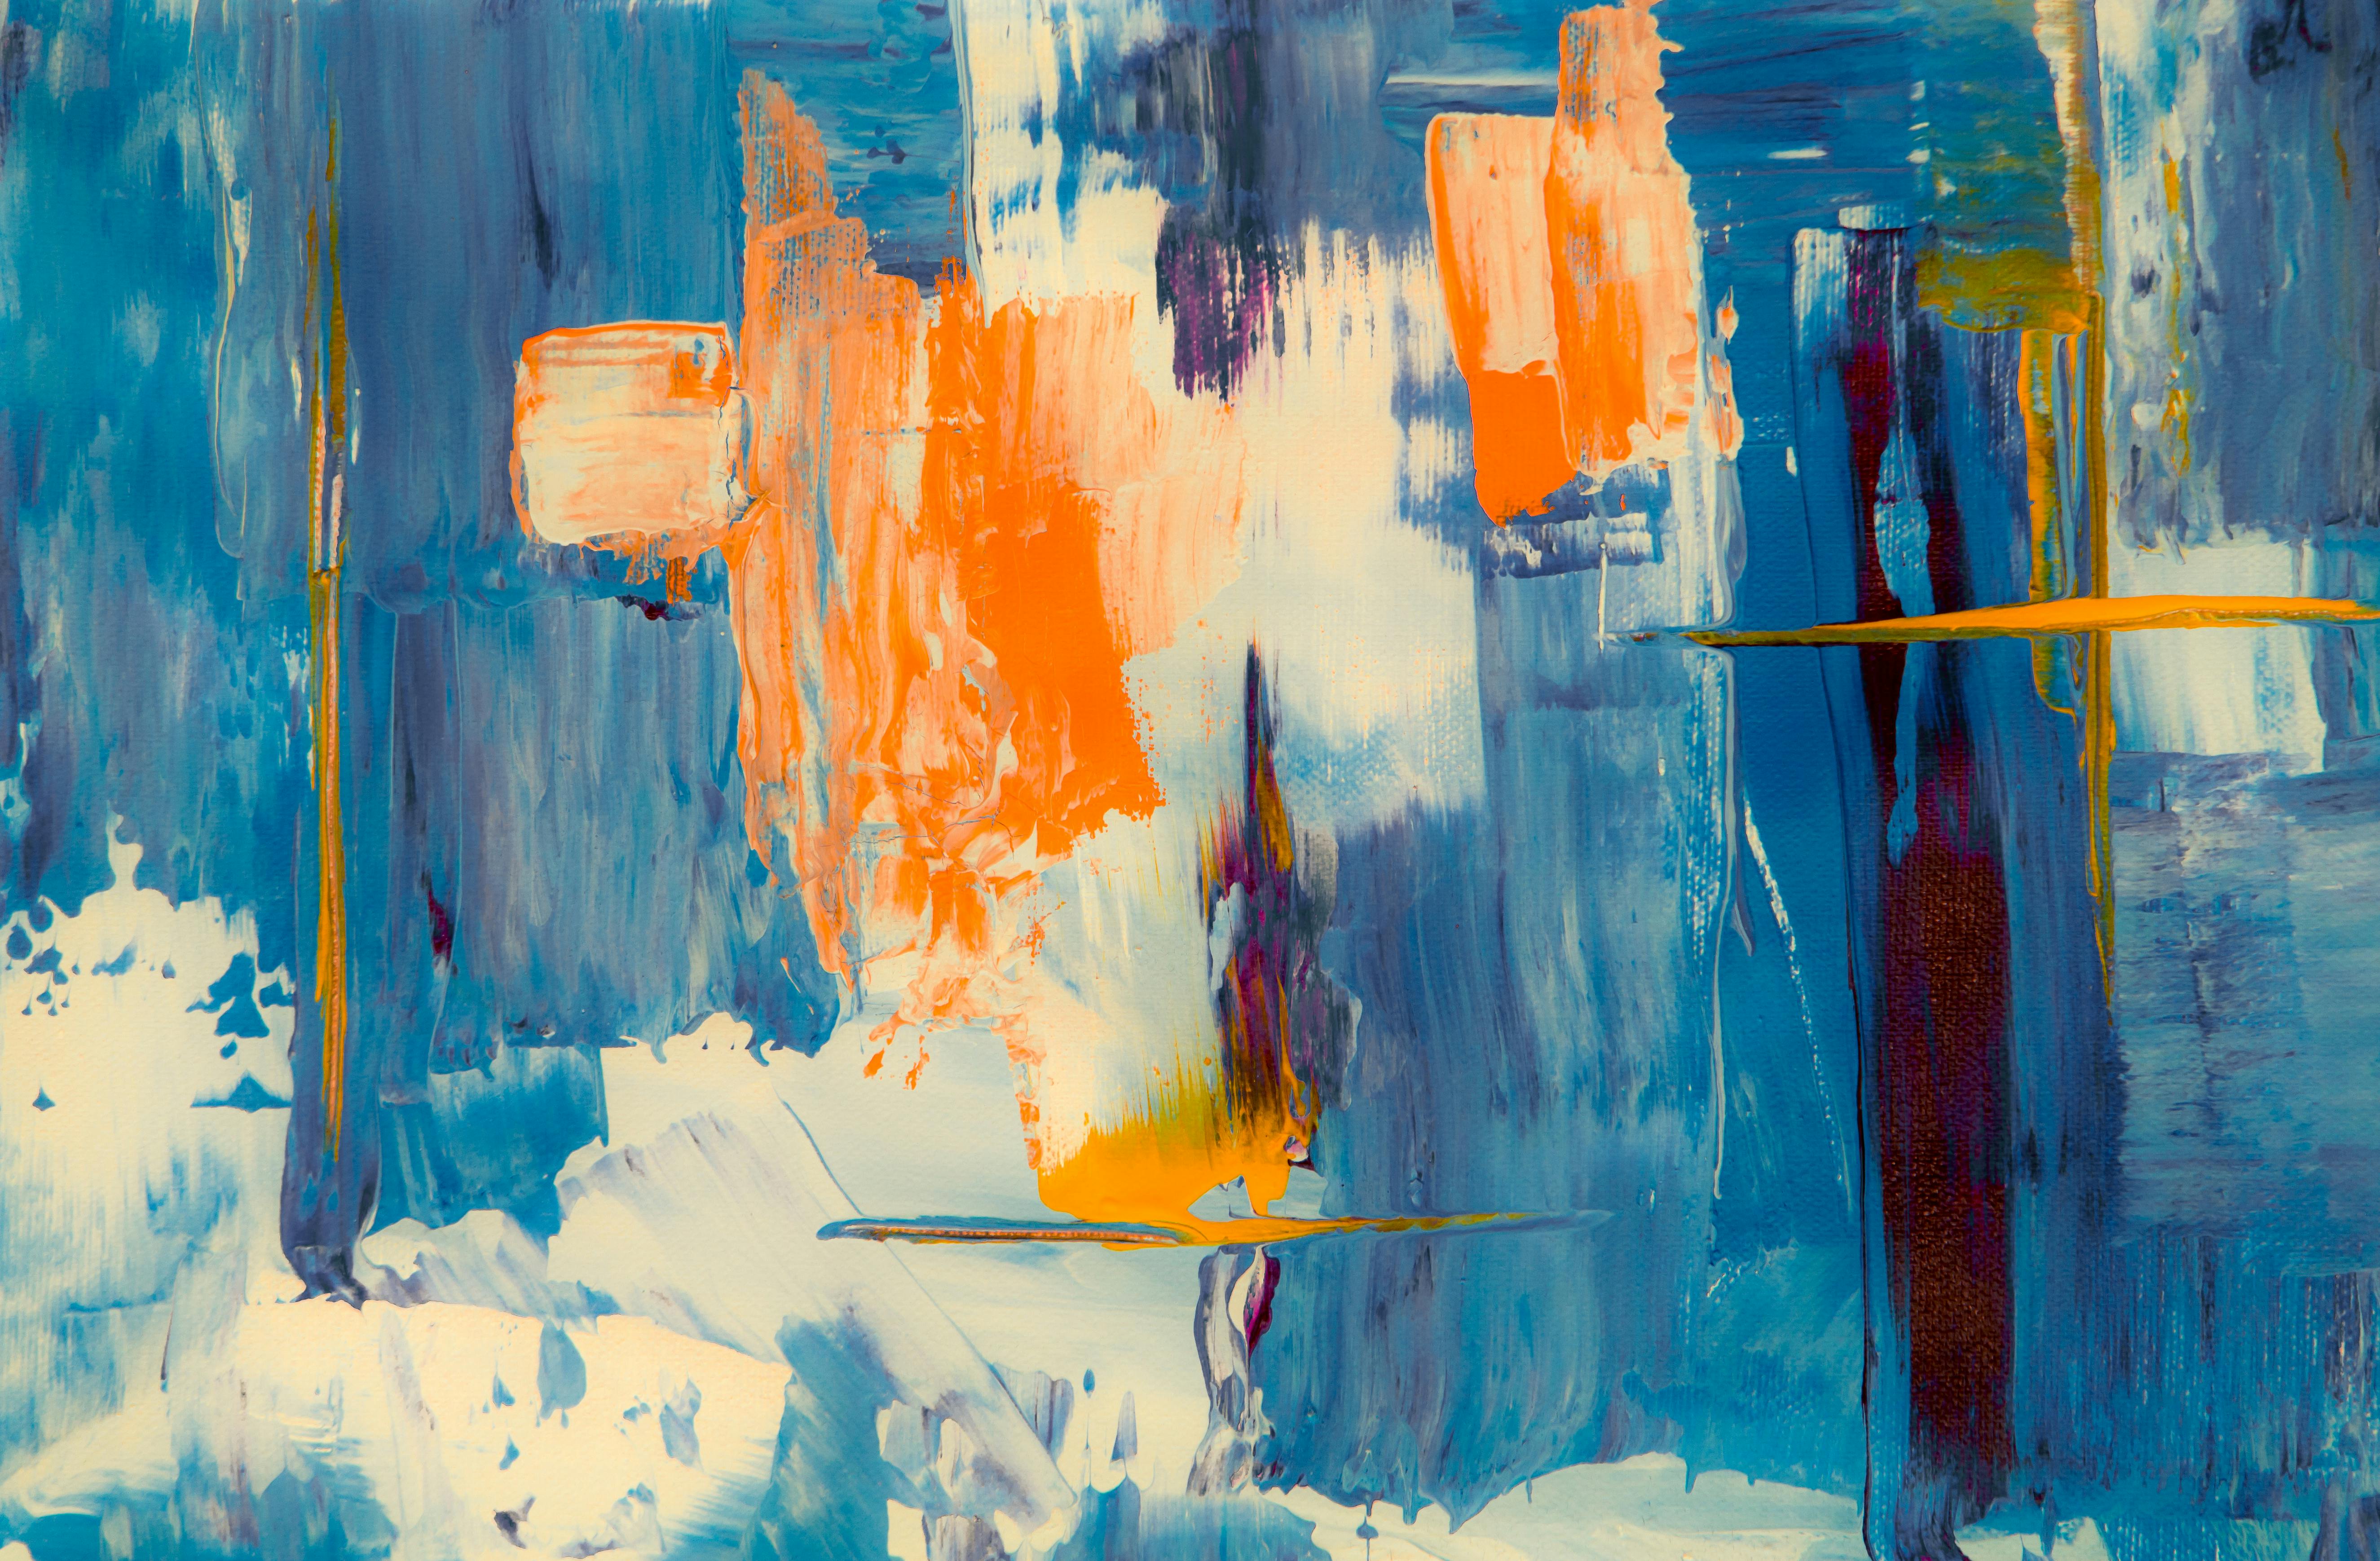 Blue, White, and Orange Abstract Painting Free Stock Photo